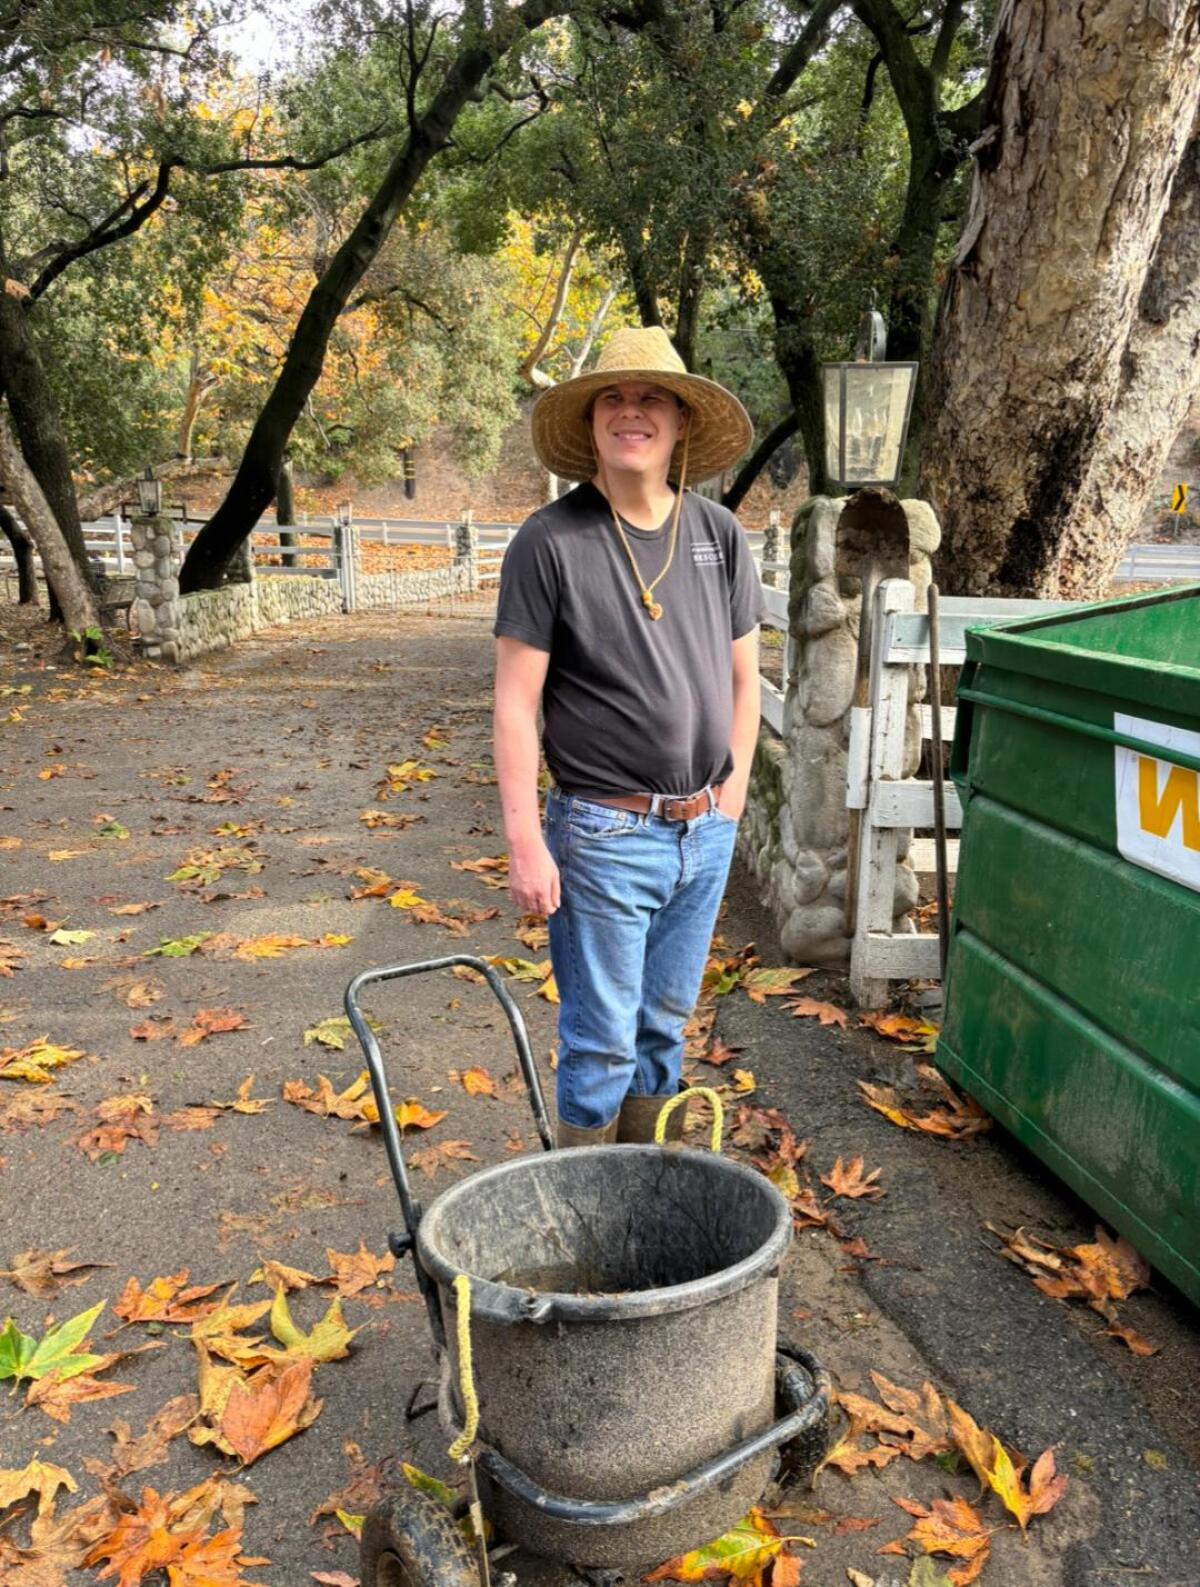 Creig Moon helps clean up at FarmHouse Rescue in Trabuco Canyon as part of the Skill-Building Program.